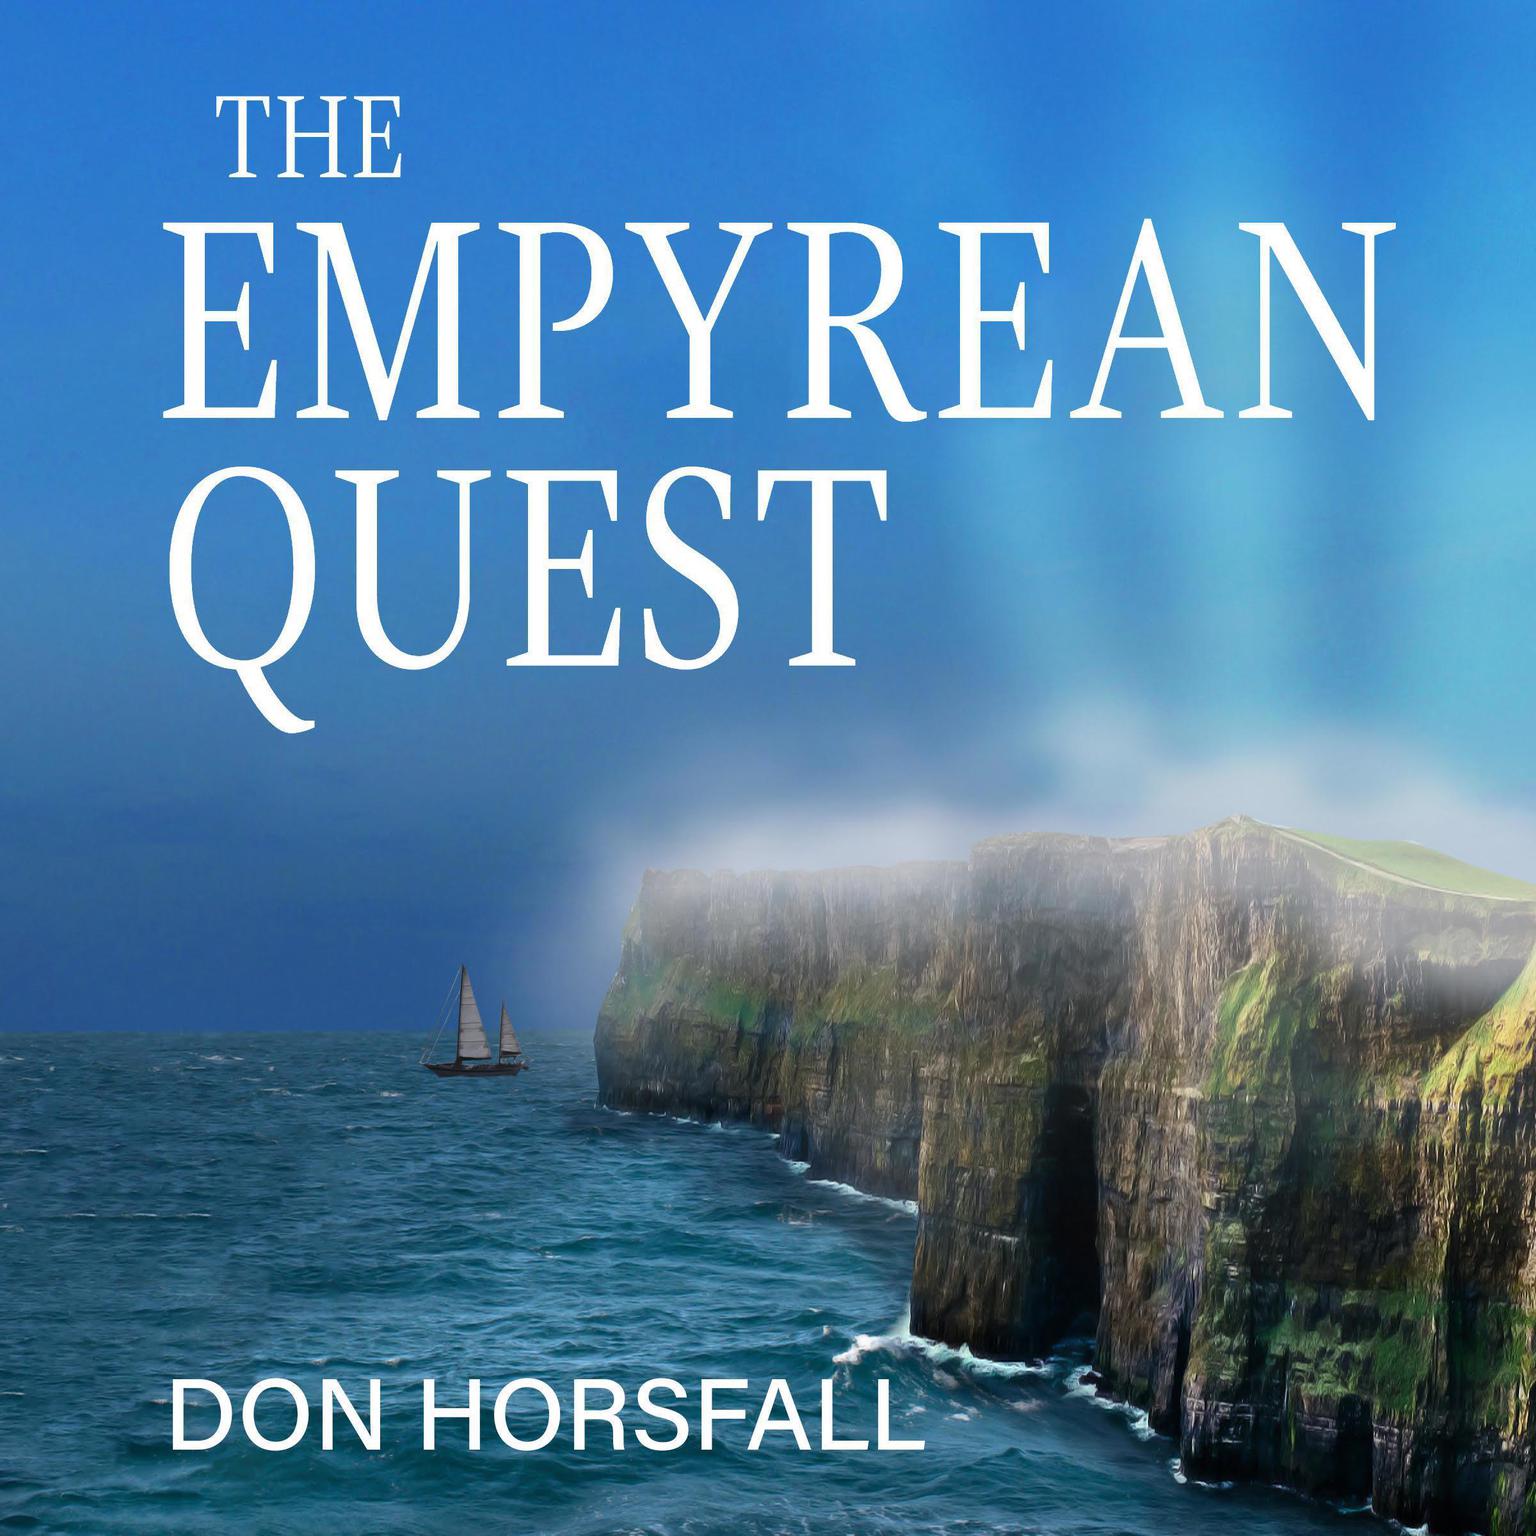 The Empyrean Quest Audiobook, by Don Horsfall